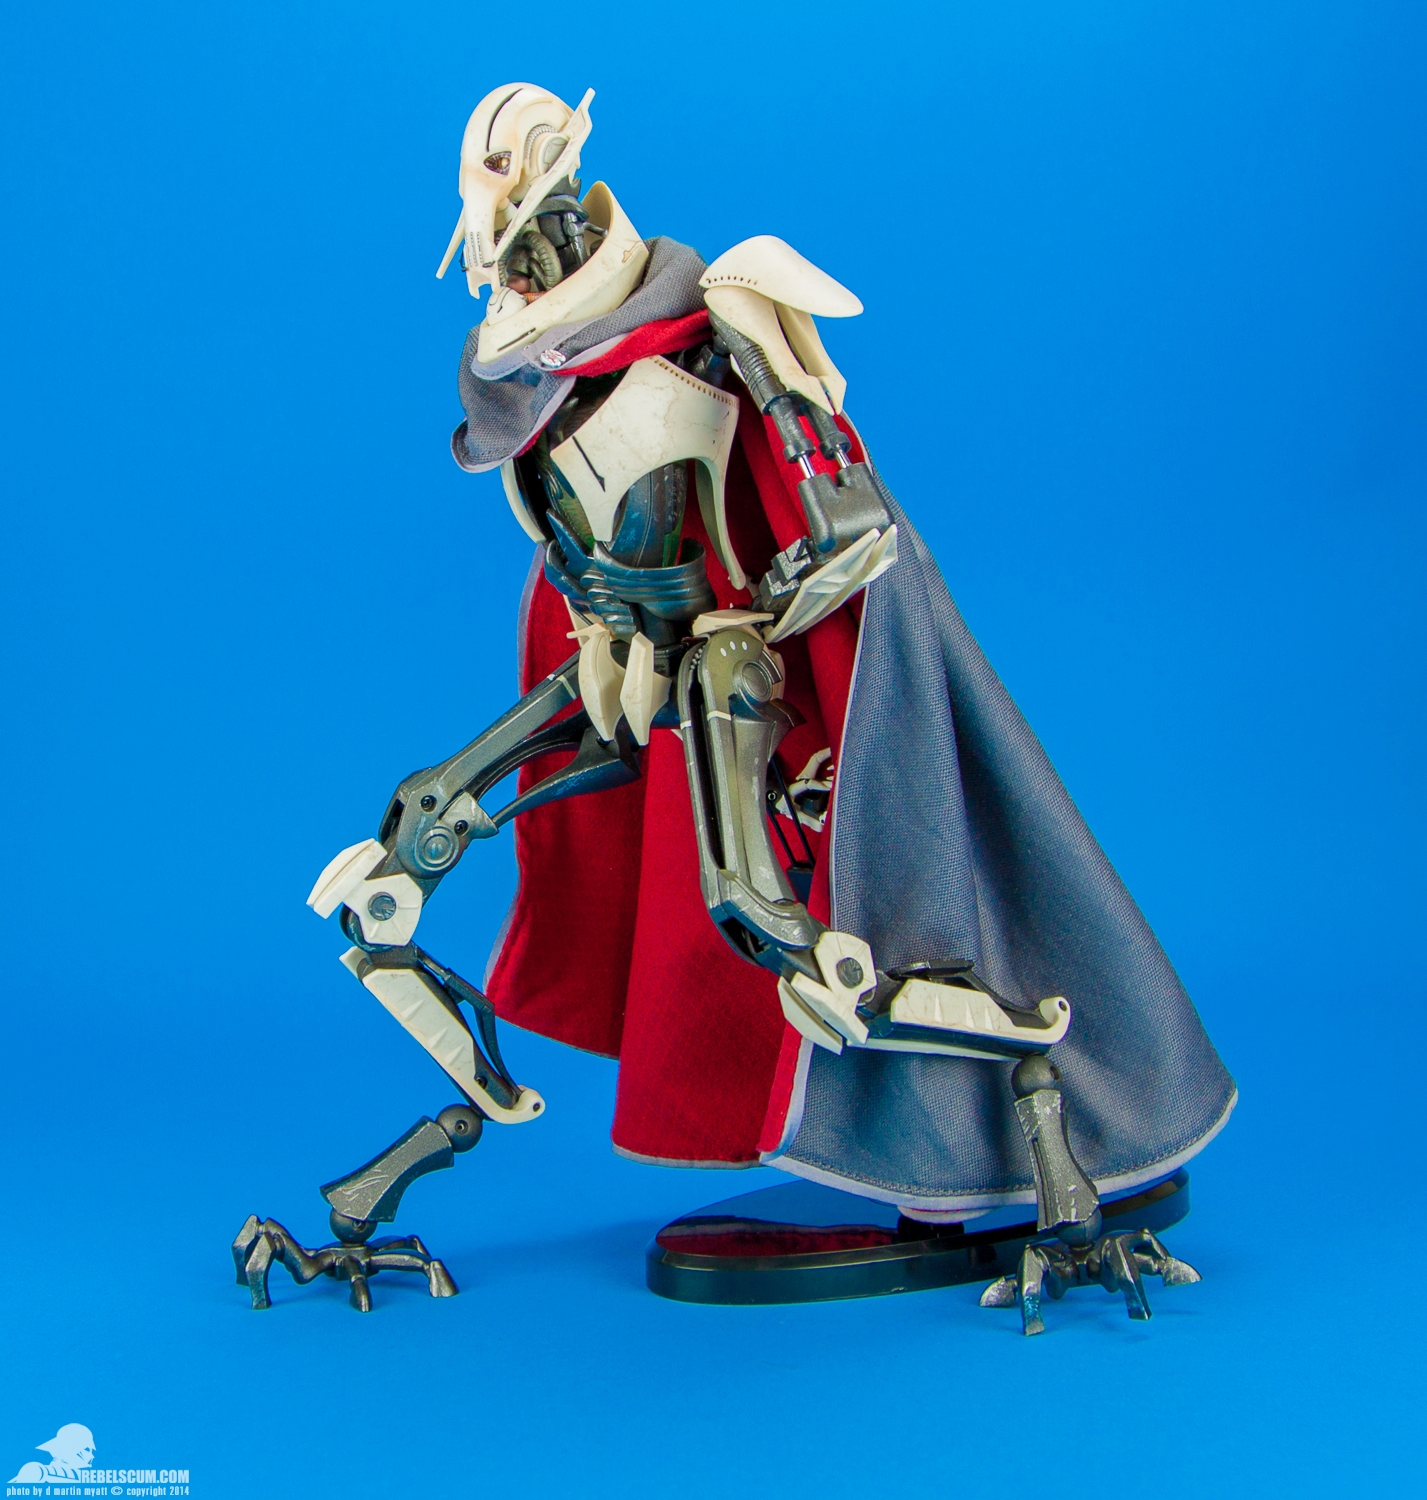 General-Grievous-Sixth-Scale-Figure-Sideshow-Collectibles-007.jpg